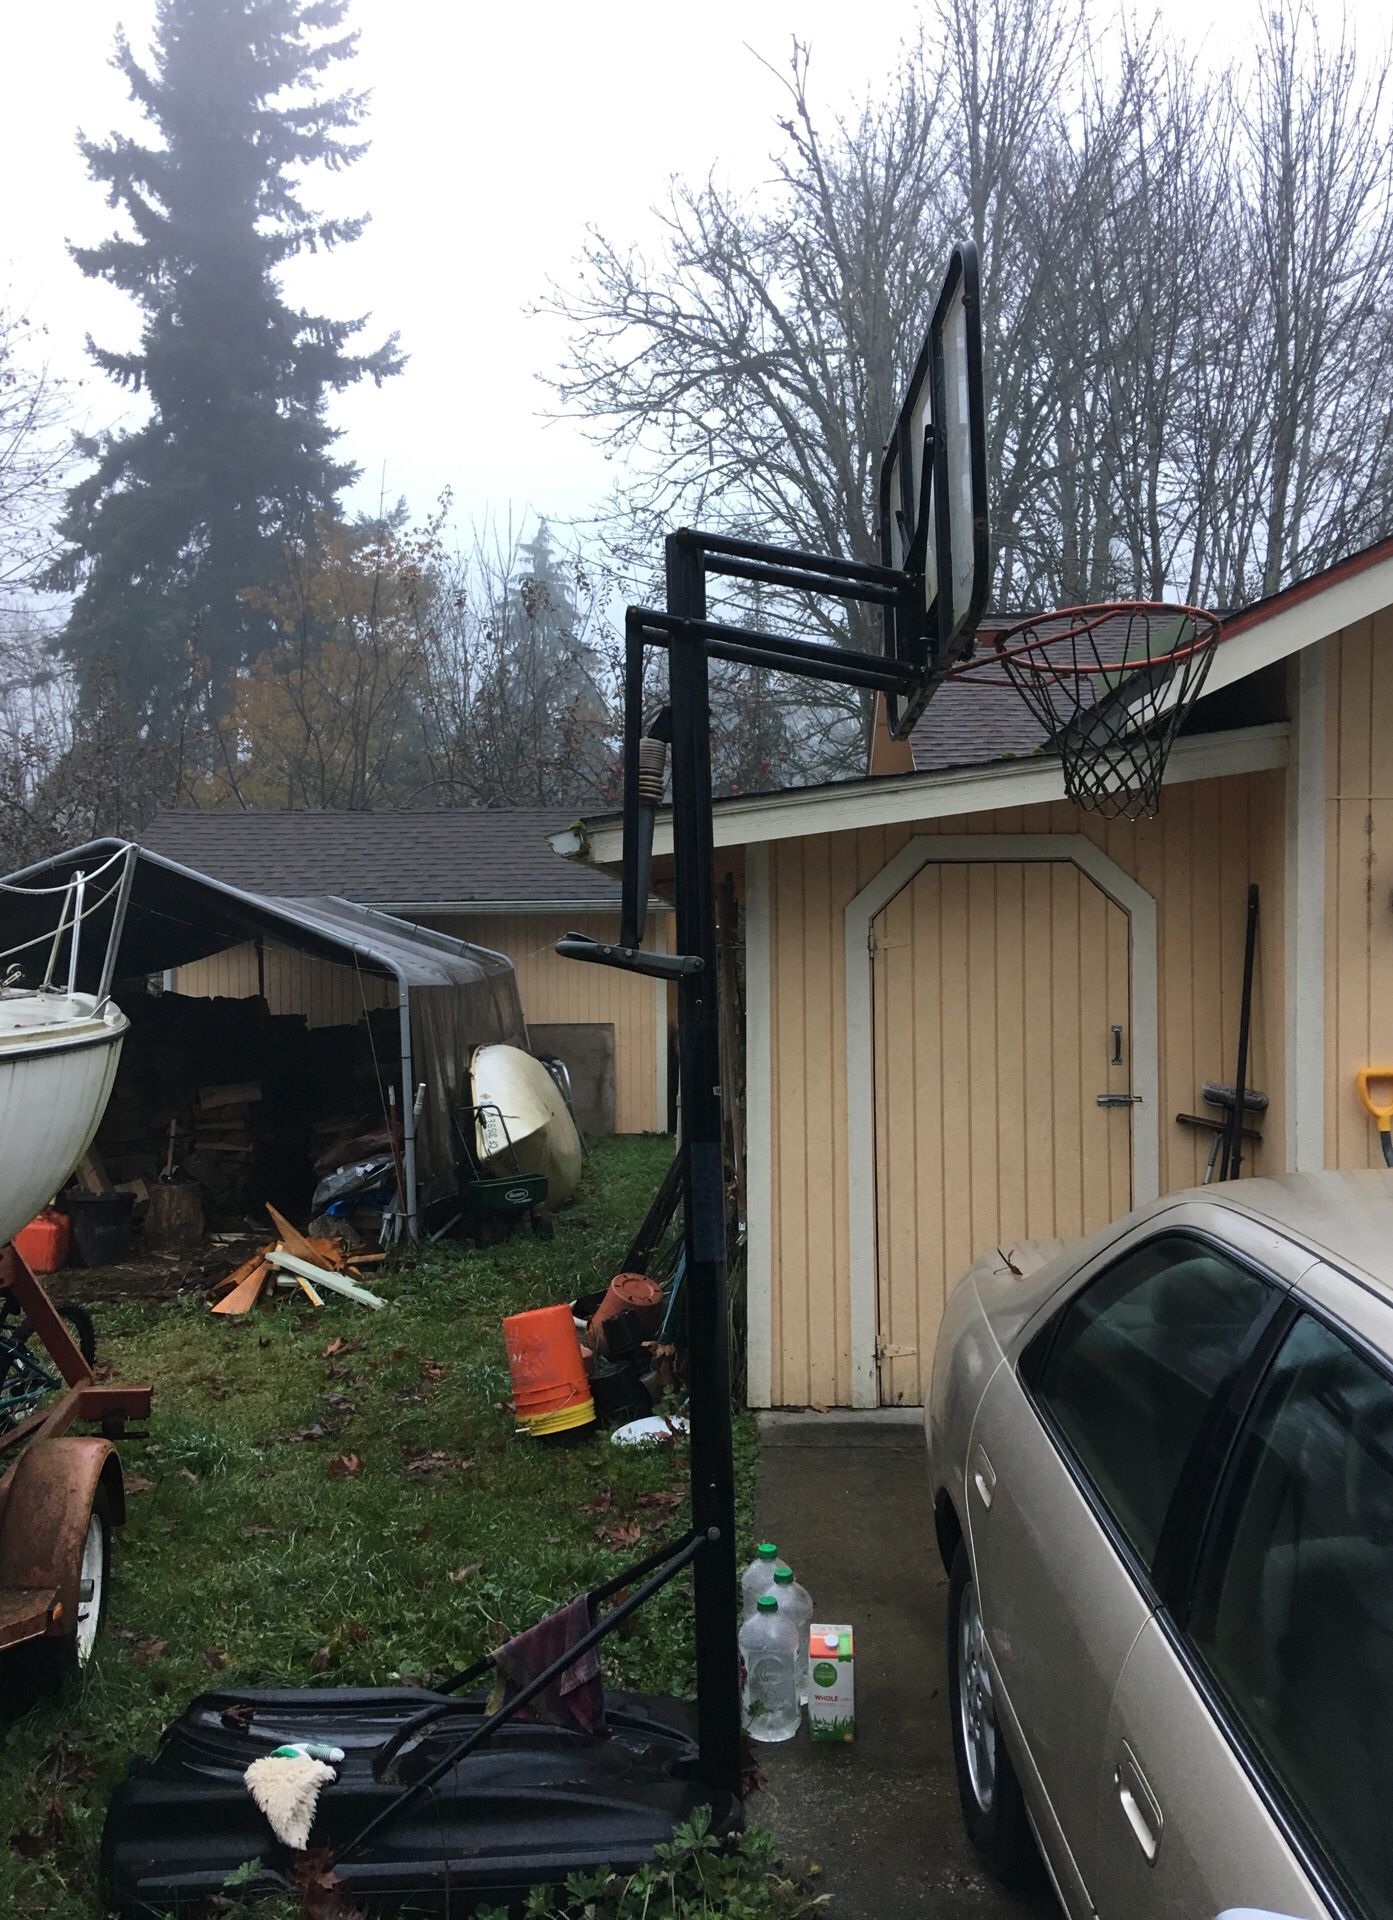 Basketball hoop. Make an offer and it’s yours.